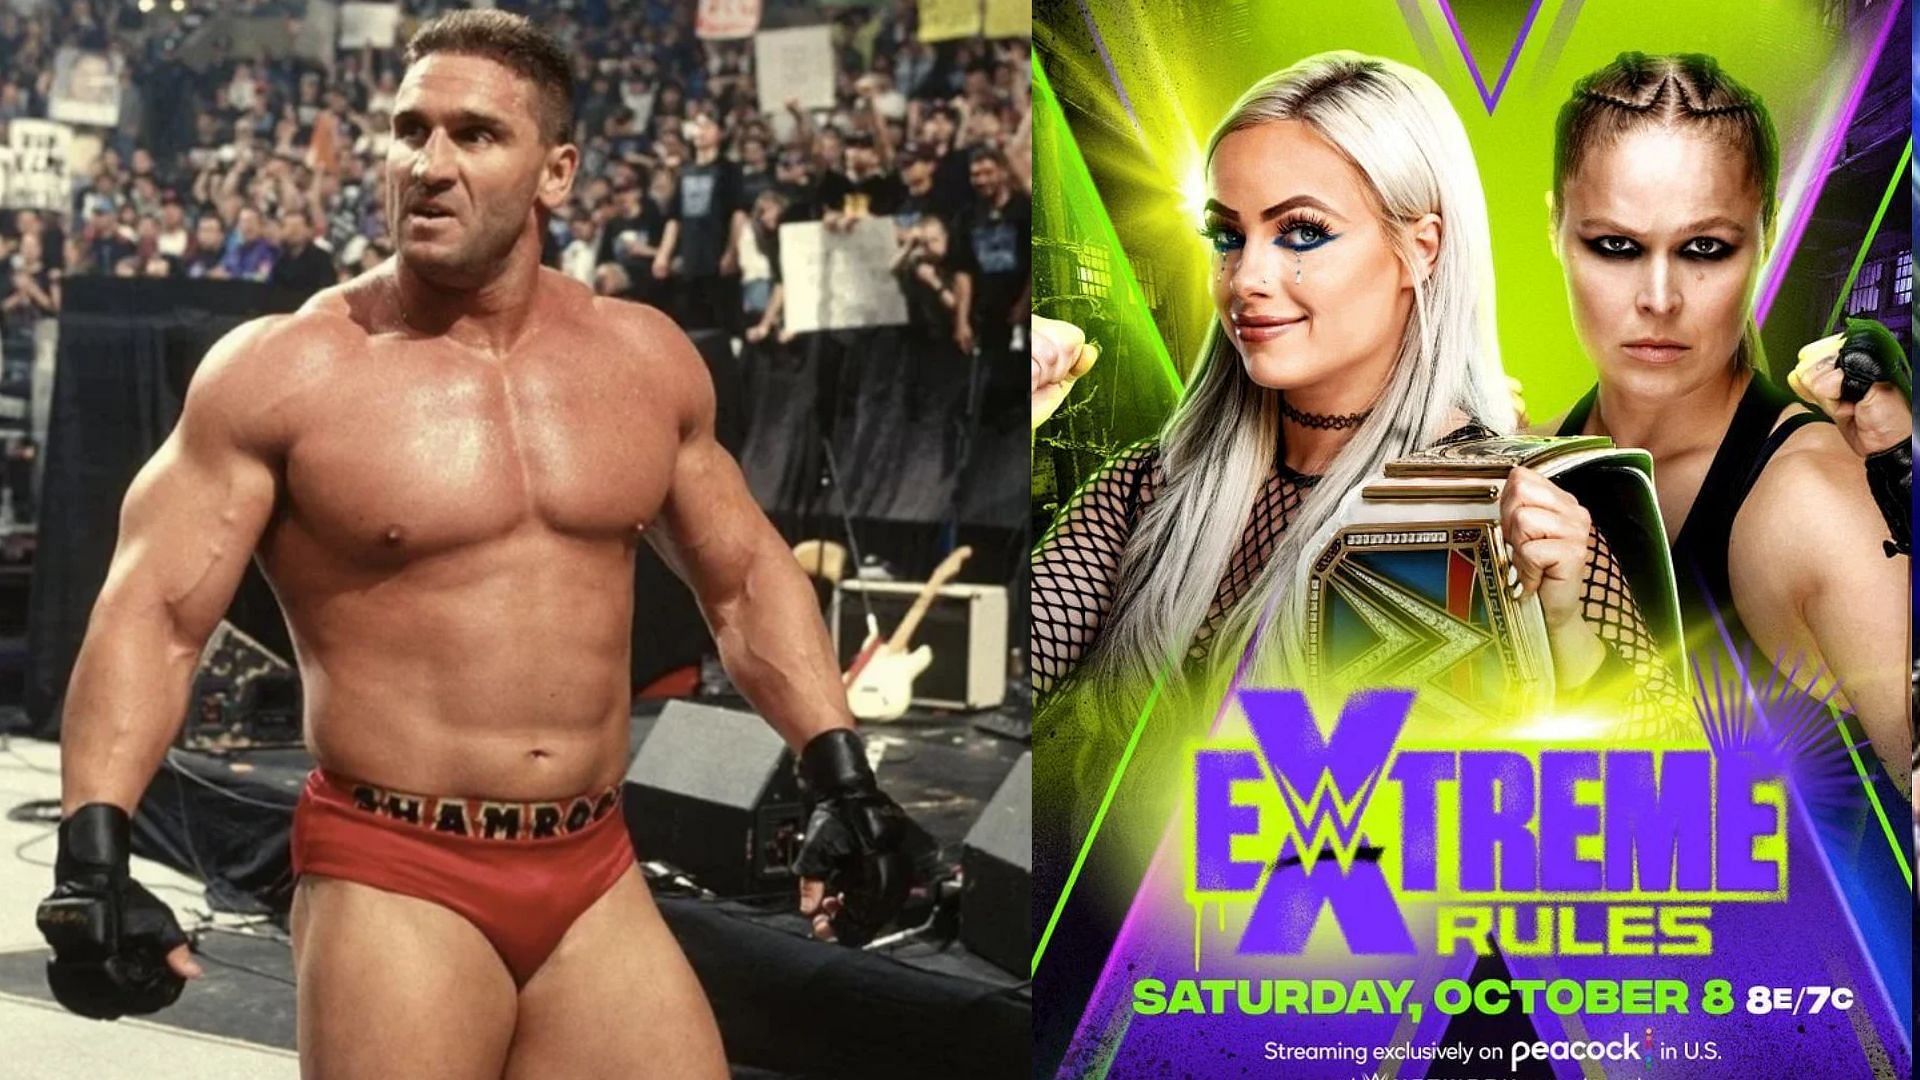 WWE Legend Ken Shamrock has been campaigning for a return to the company. Does he still have a chance of appearing at Extreme Rules?